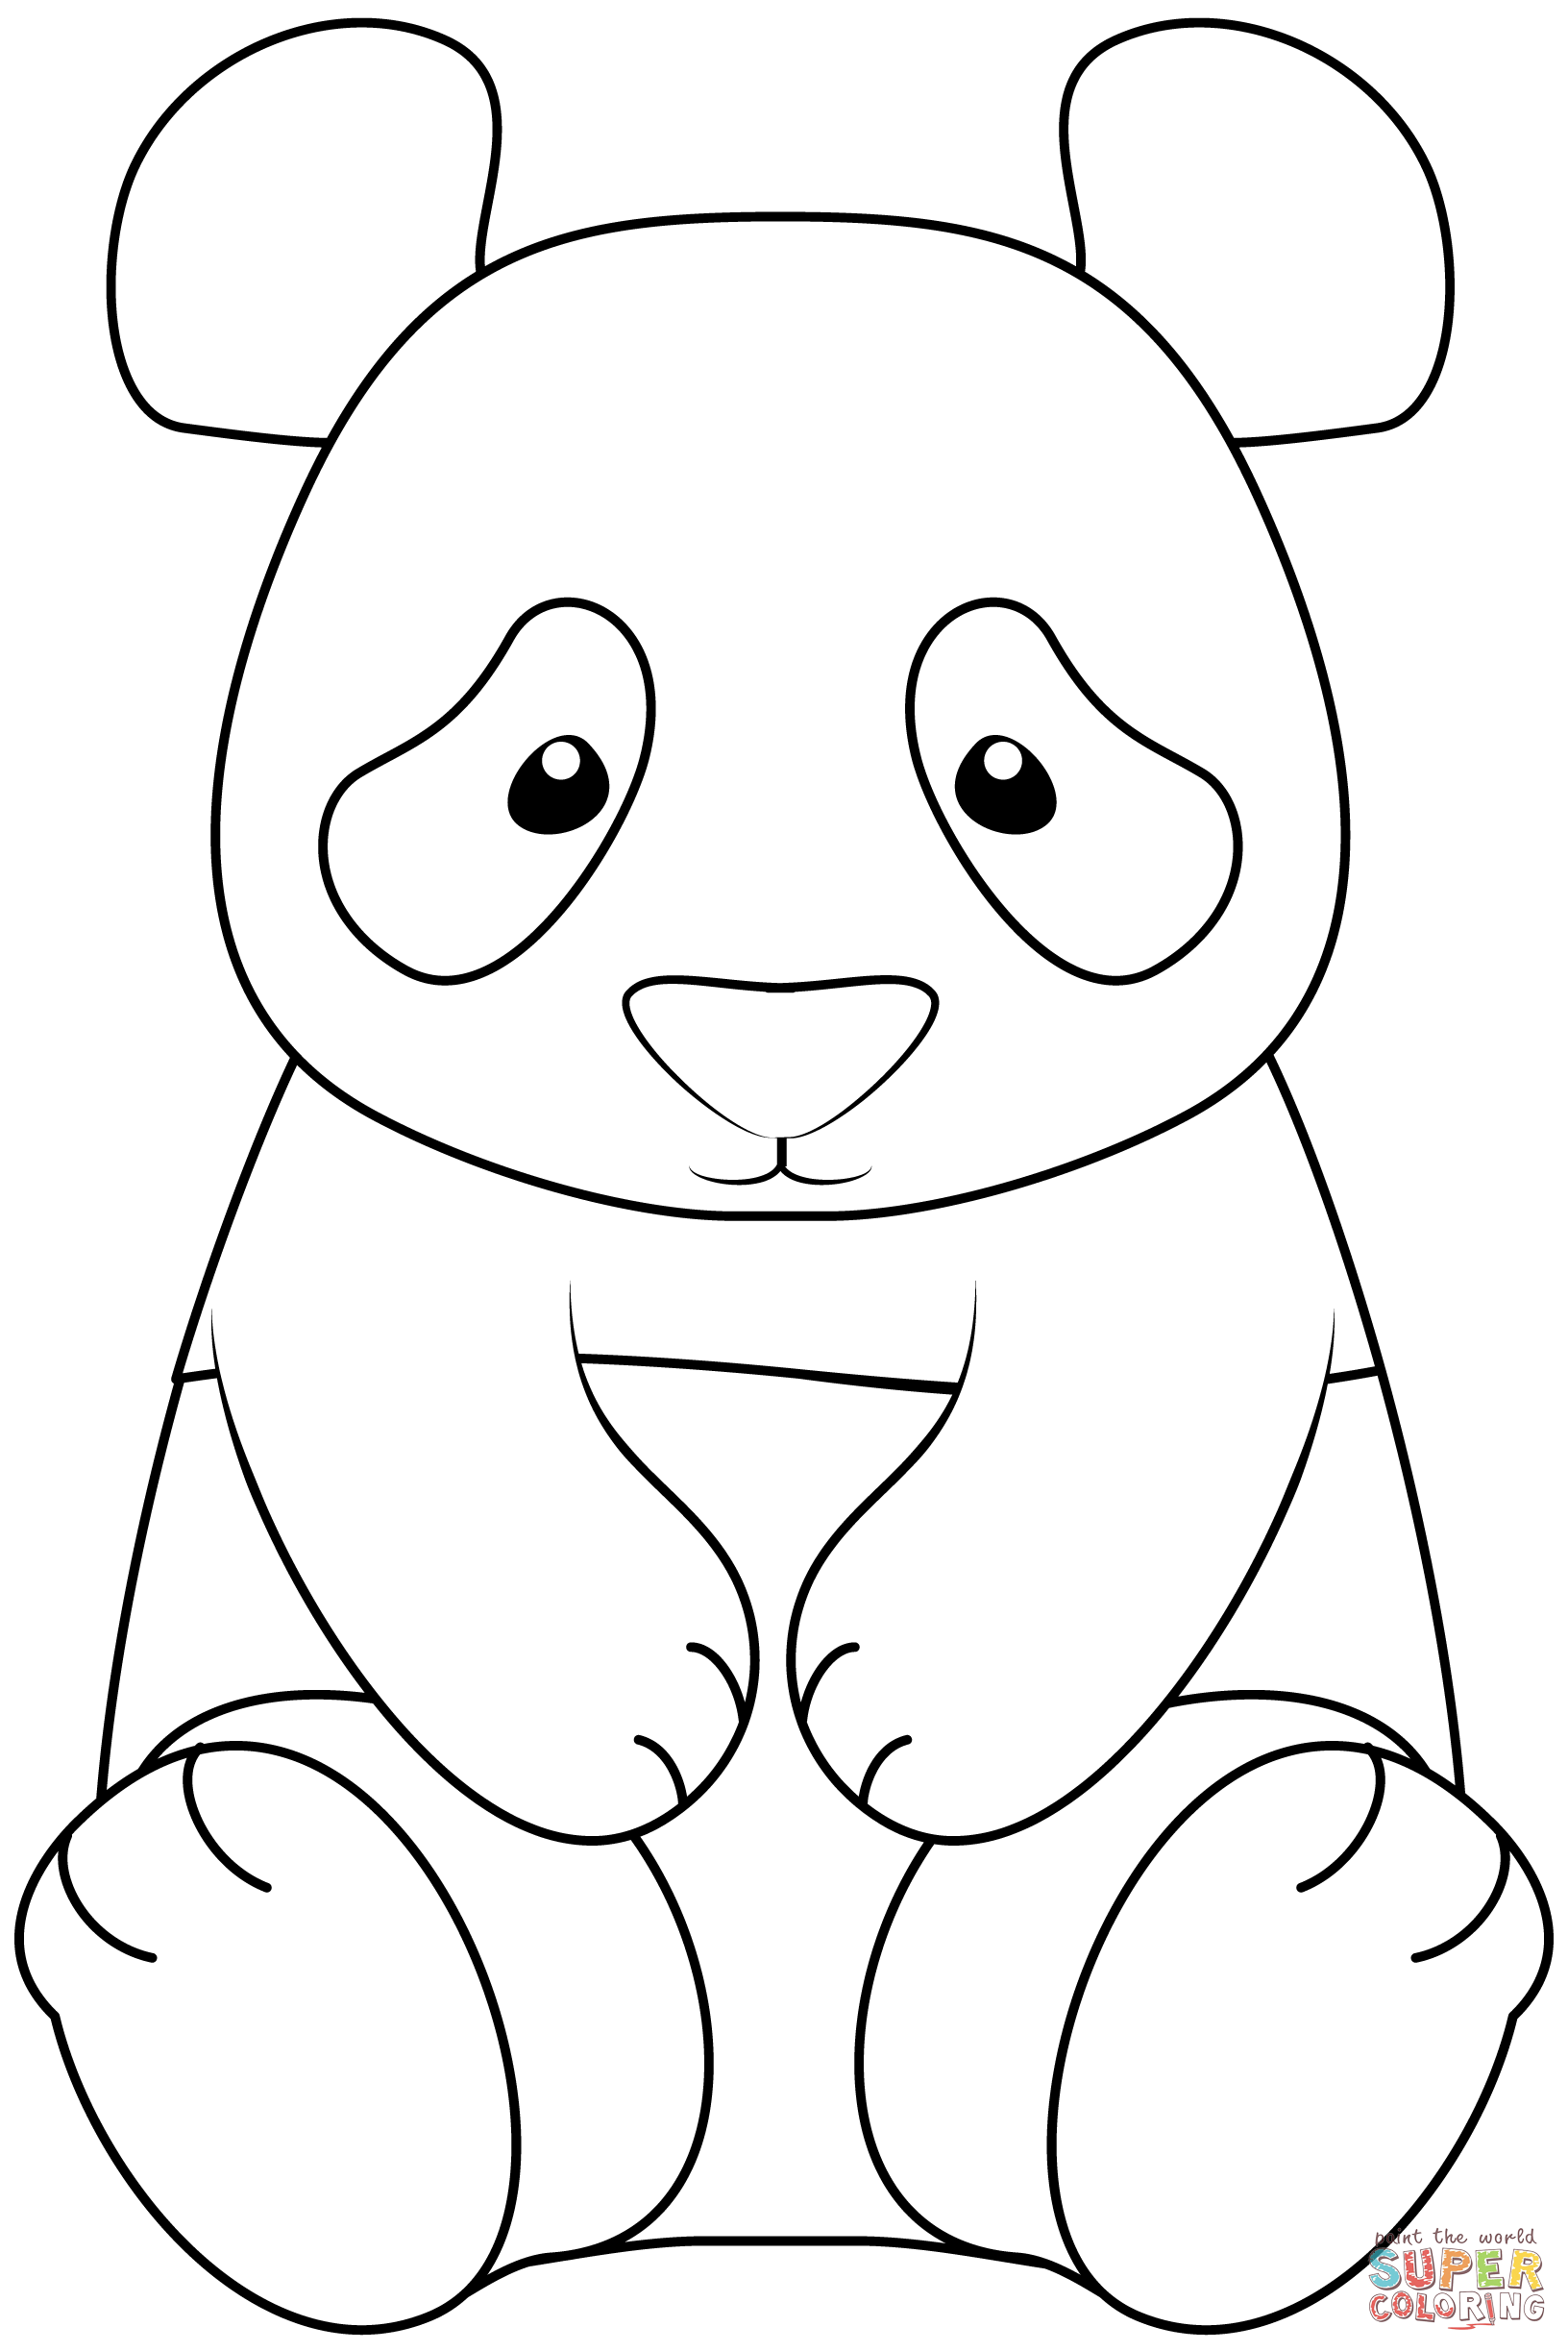 Panda coloring page | Free Printable Coloring Pages